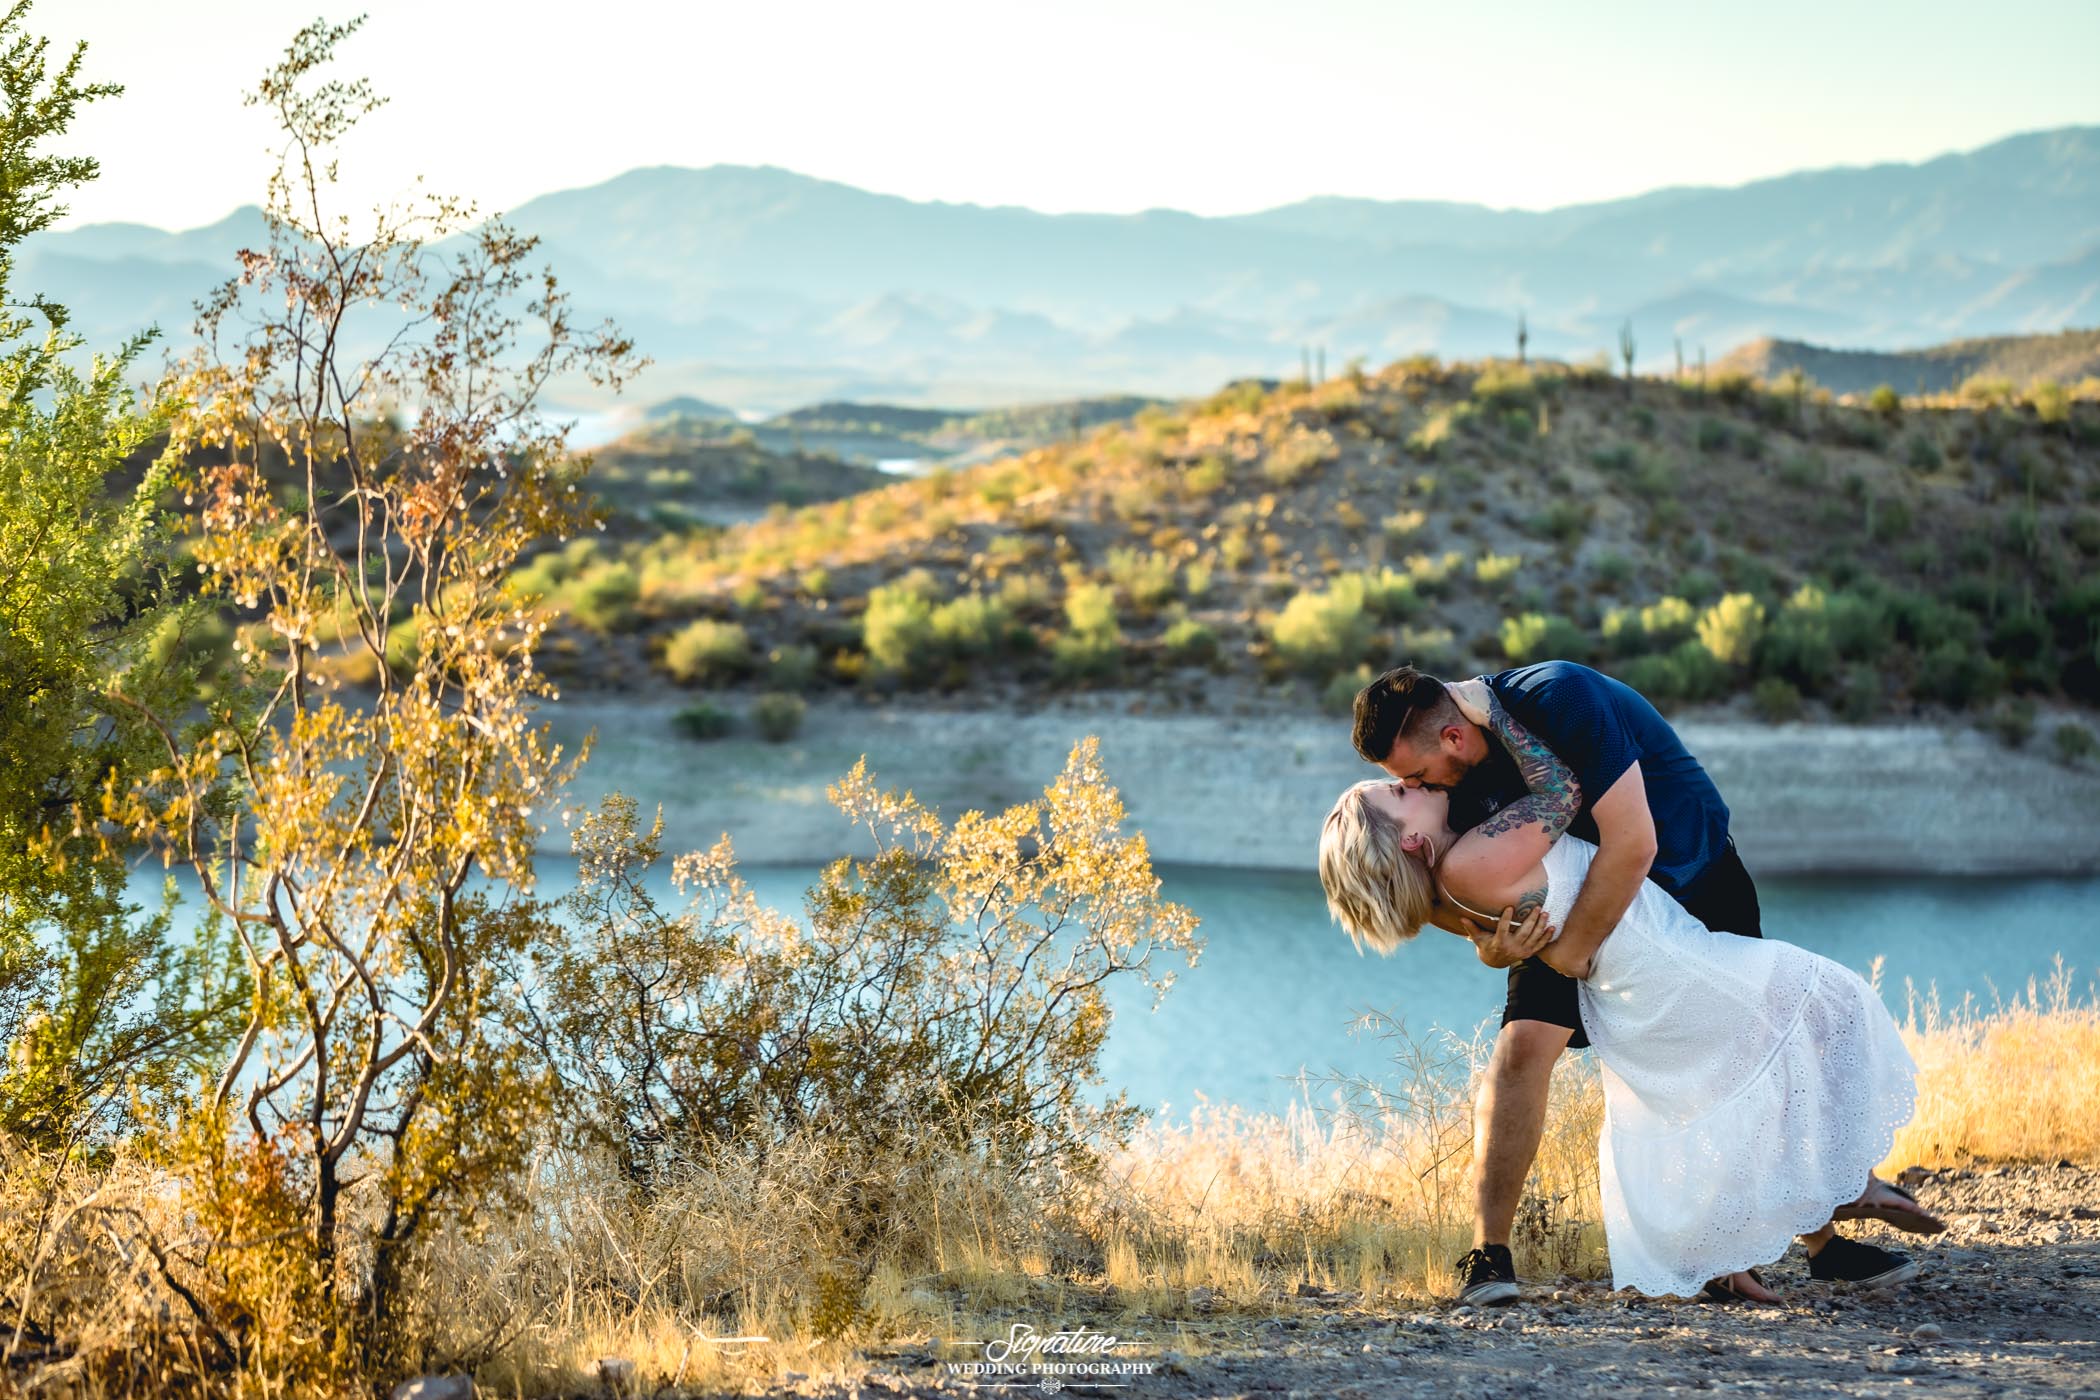 Couple dipping and kissing at lake in desert